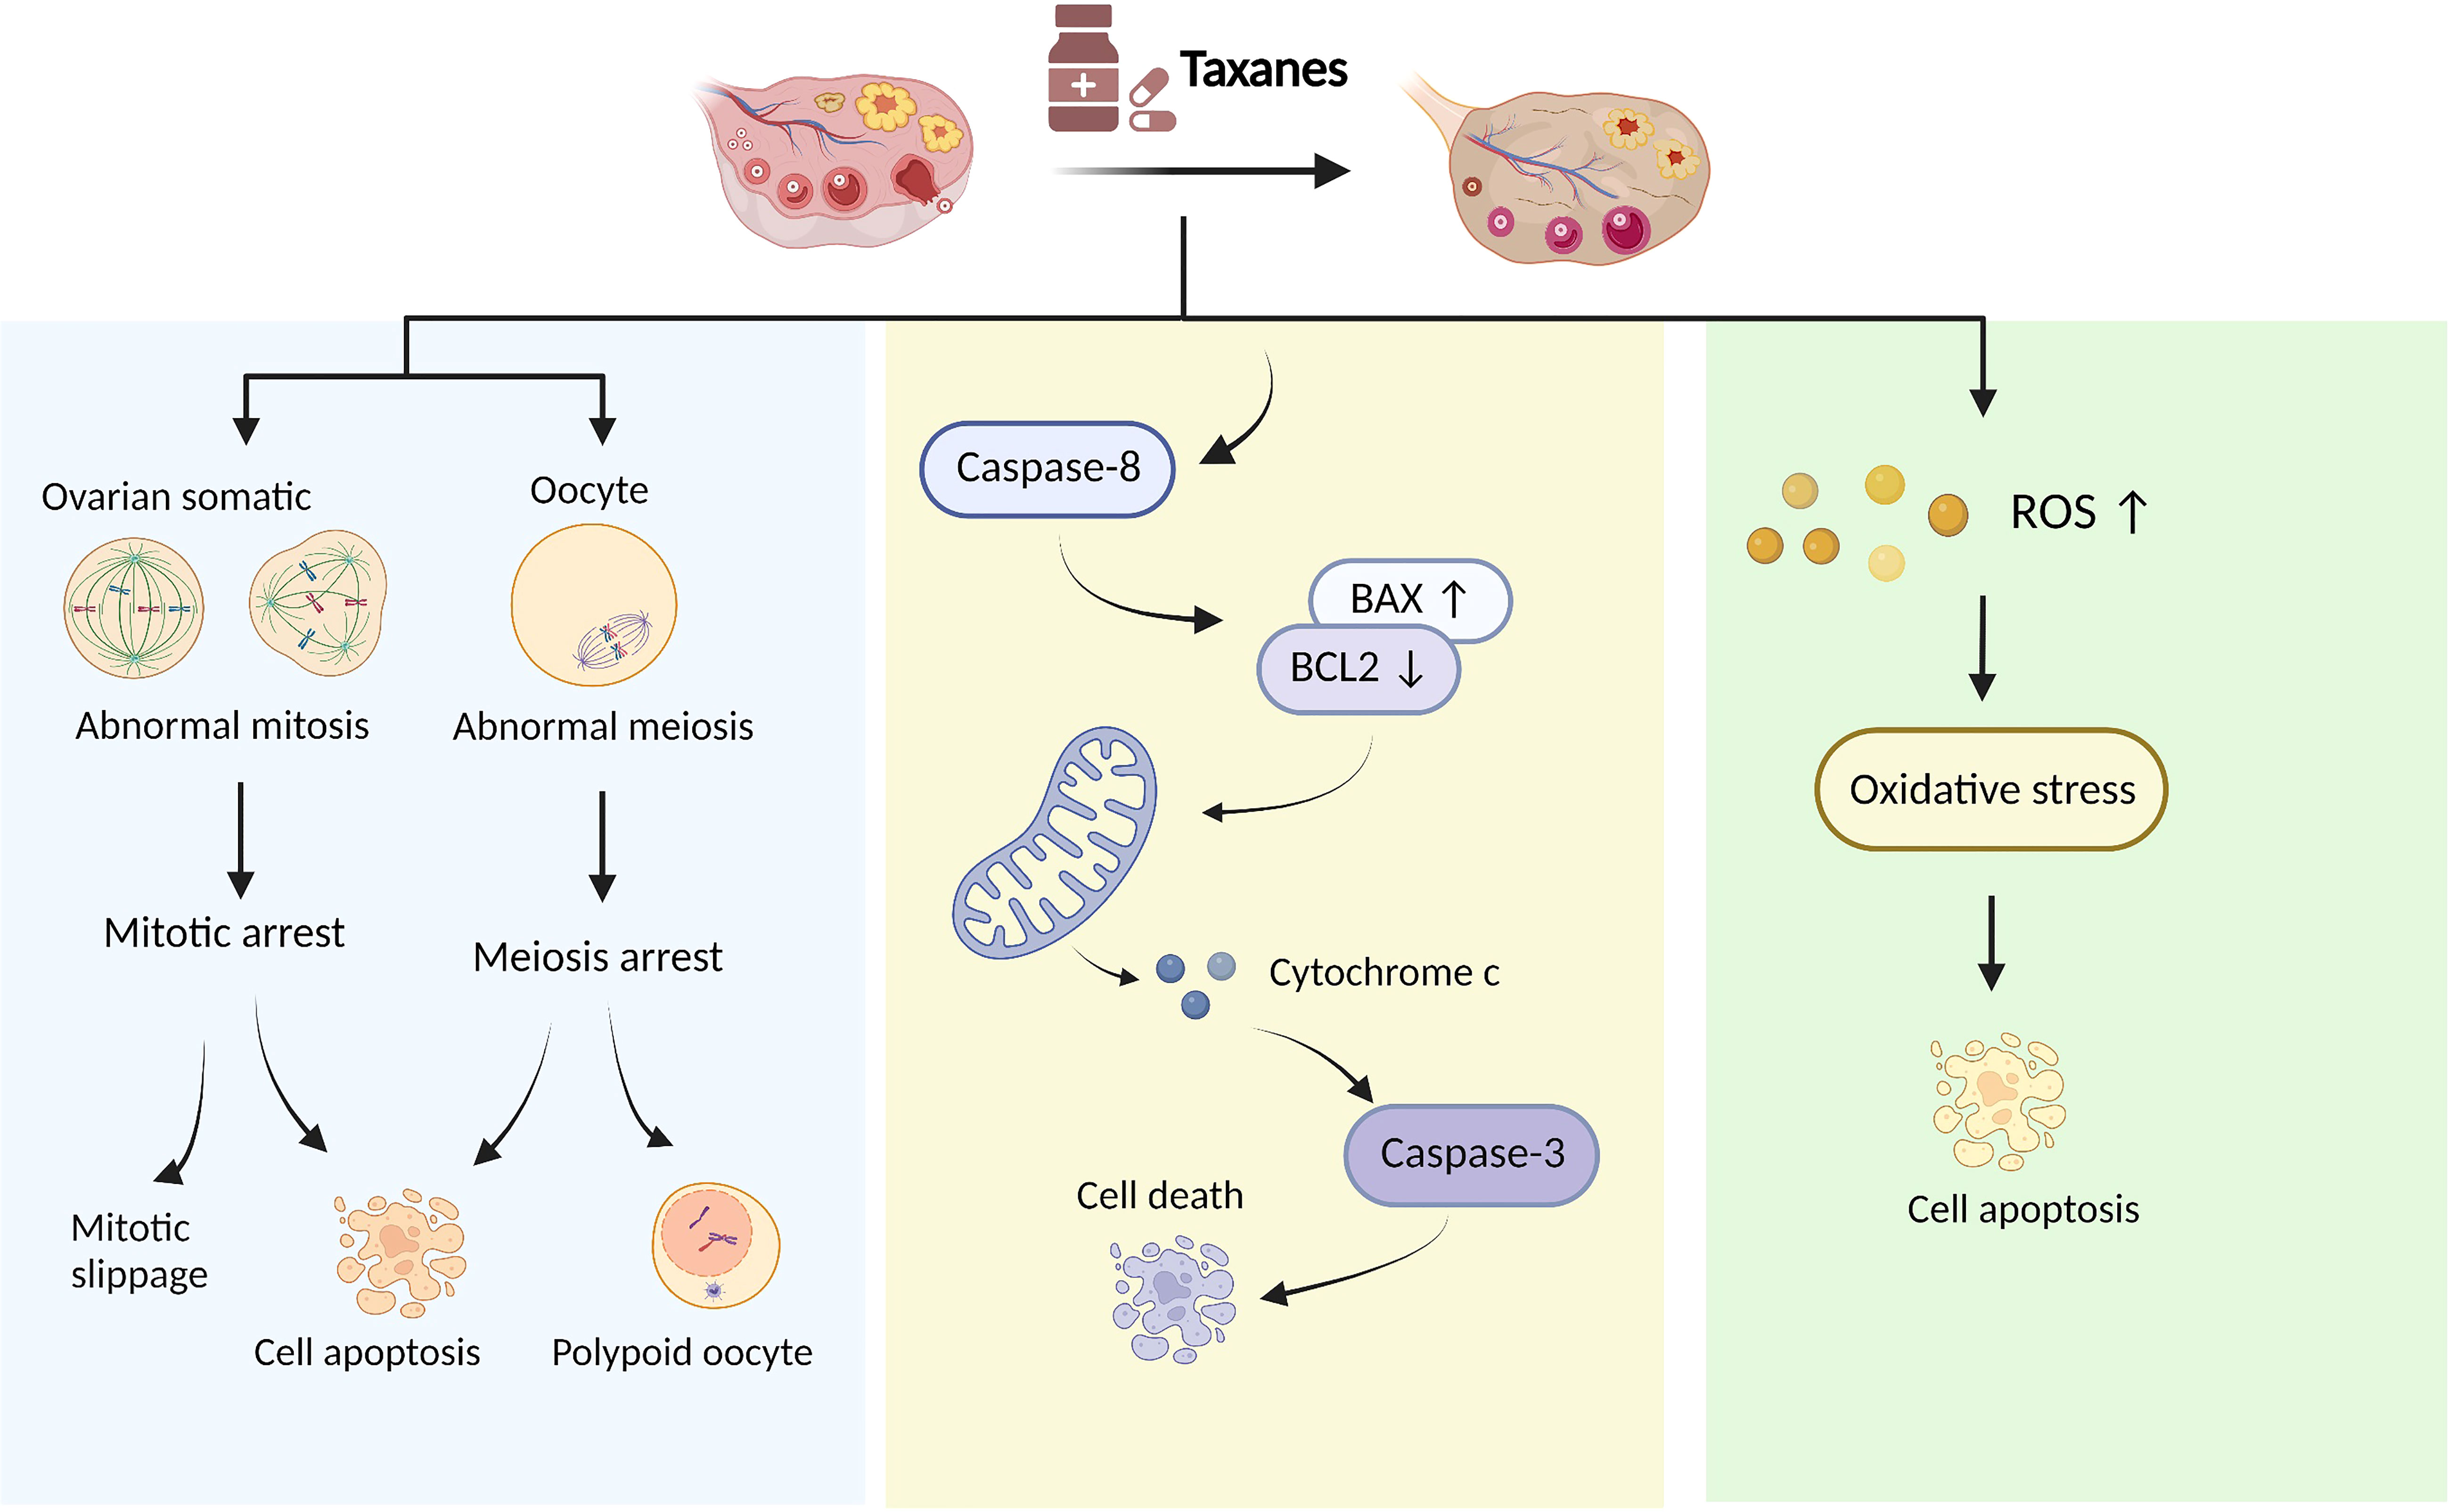 Frontiers | The effects and mechanism of taxanes on chemotherapy